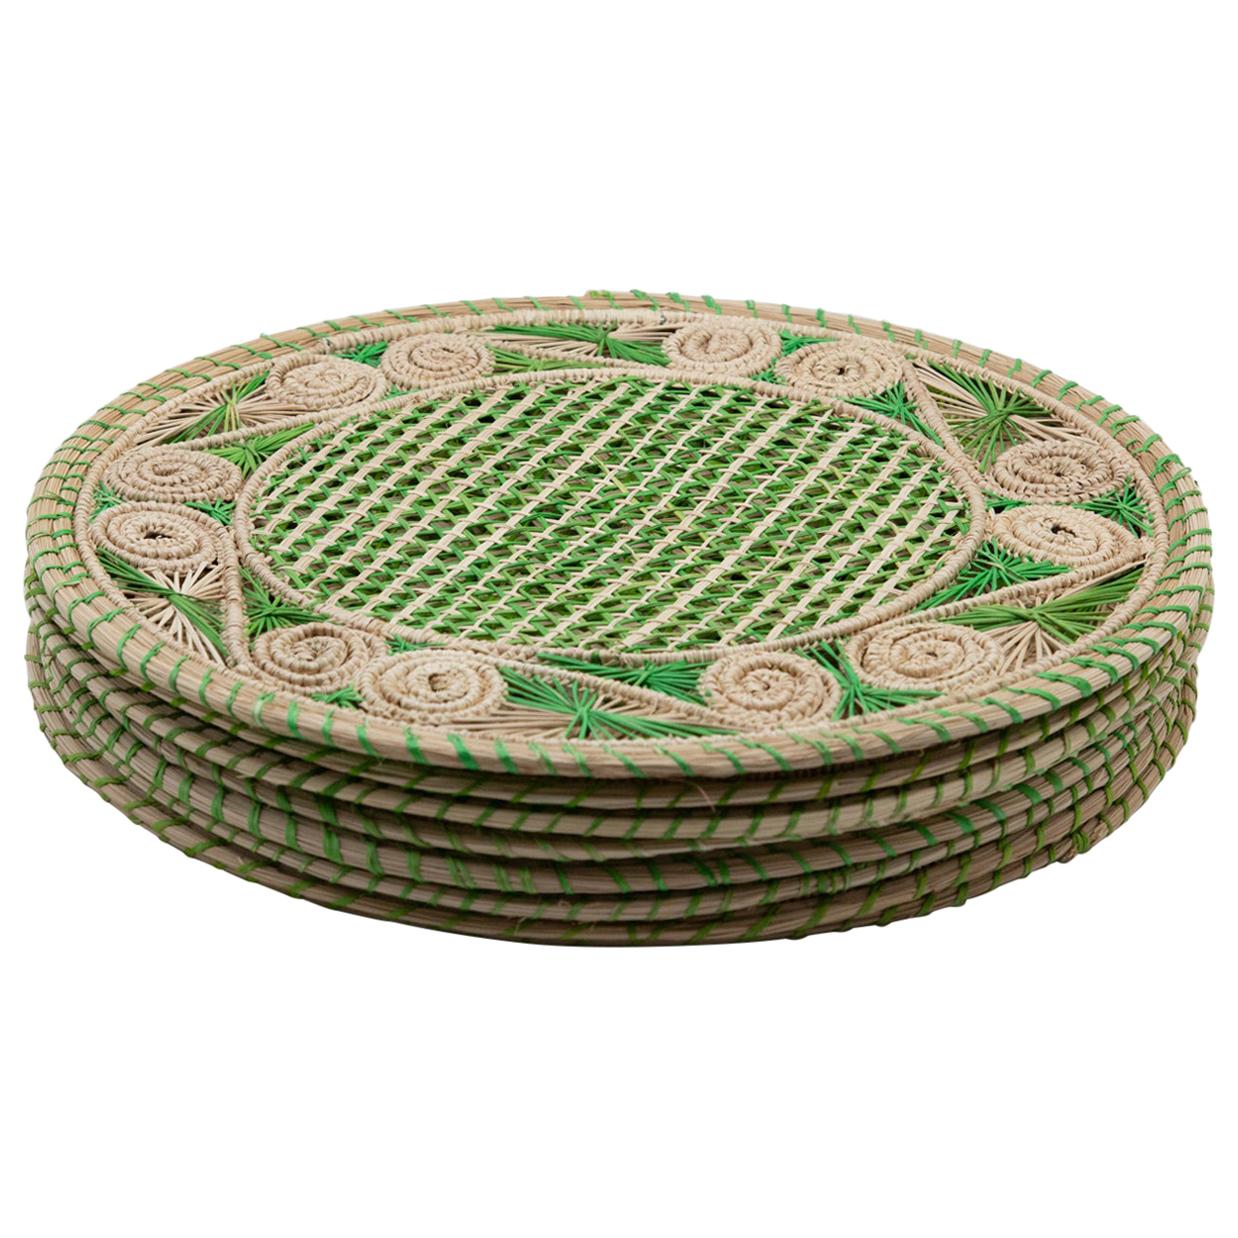 Set of 8 Green and Cream Round Iraca Fibre Placemats